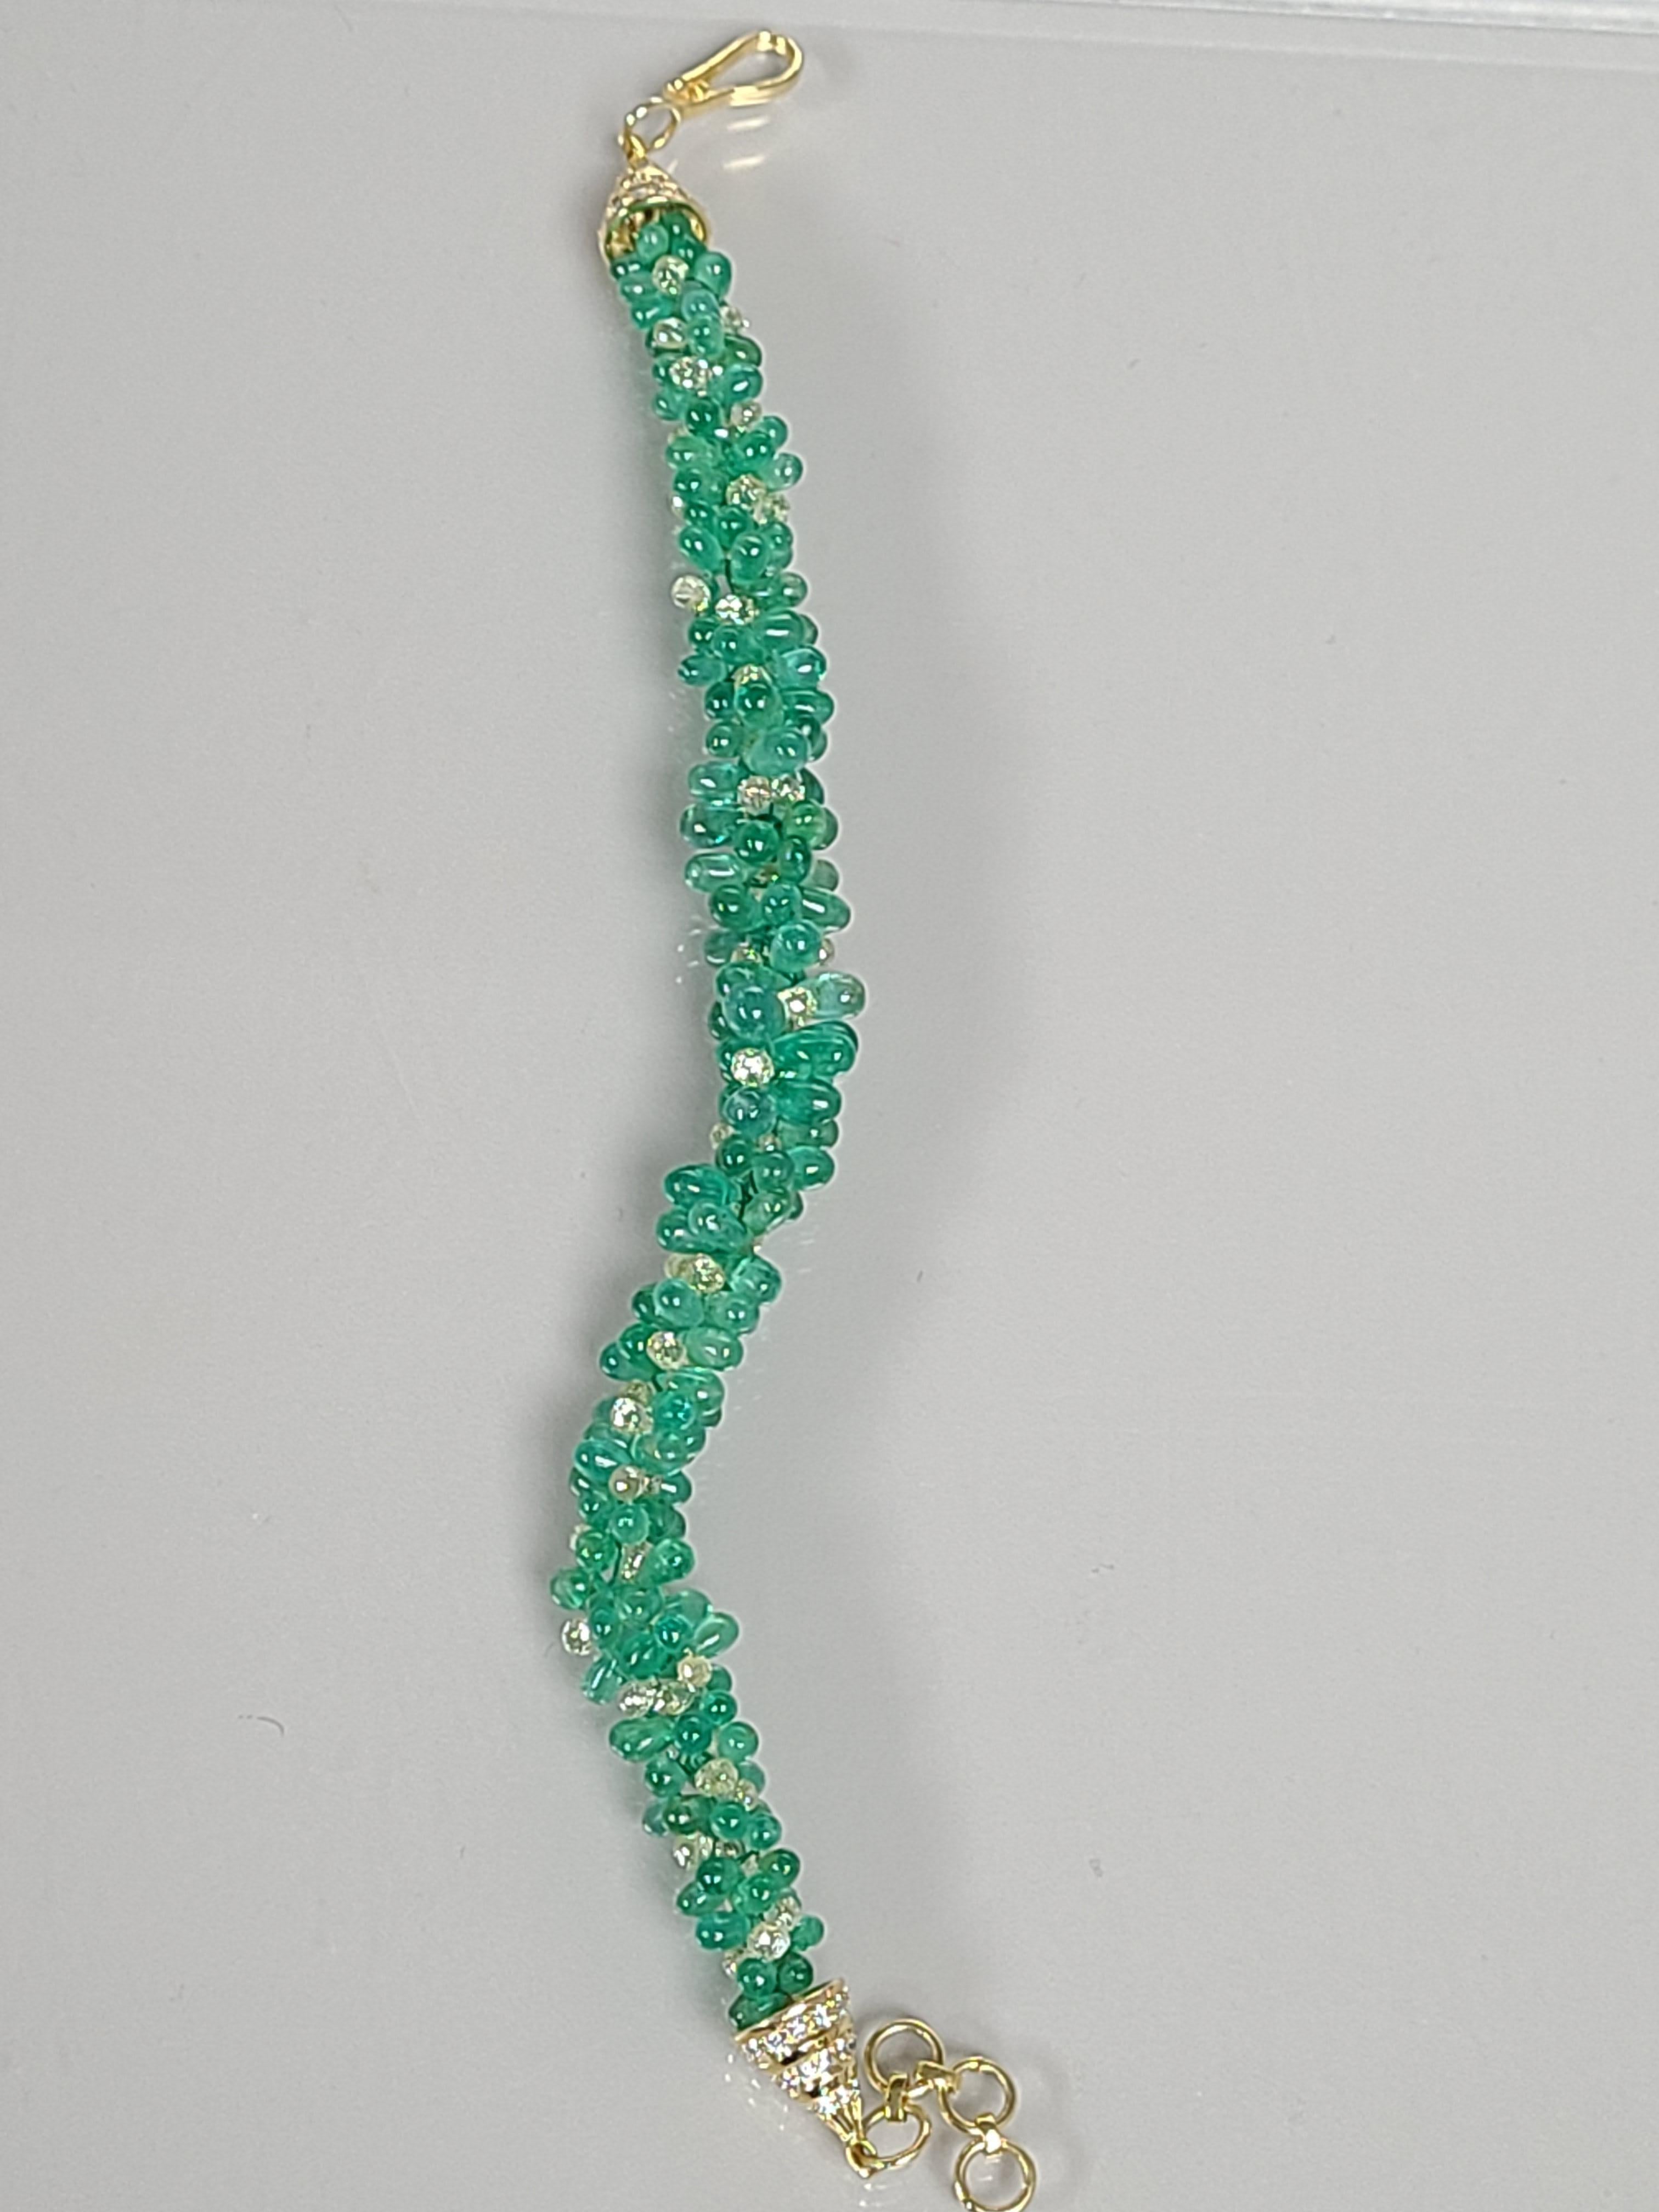 A beautiful and Unique Emerald bracelet with diamond round and diamond briolette in 18k gold. The emerald weight in the bracelet is 52.22 carats and combined diamond weight is 13.30 carats. The length of the bracelet in inch is 6.75.